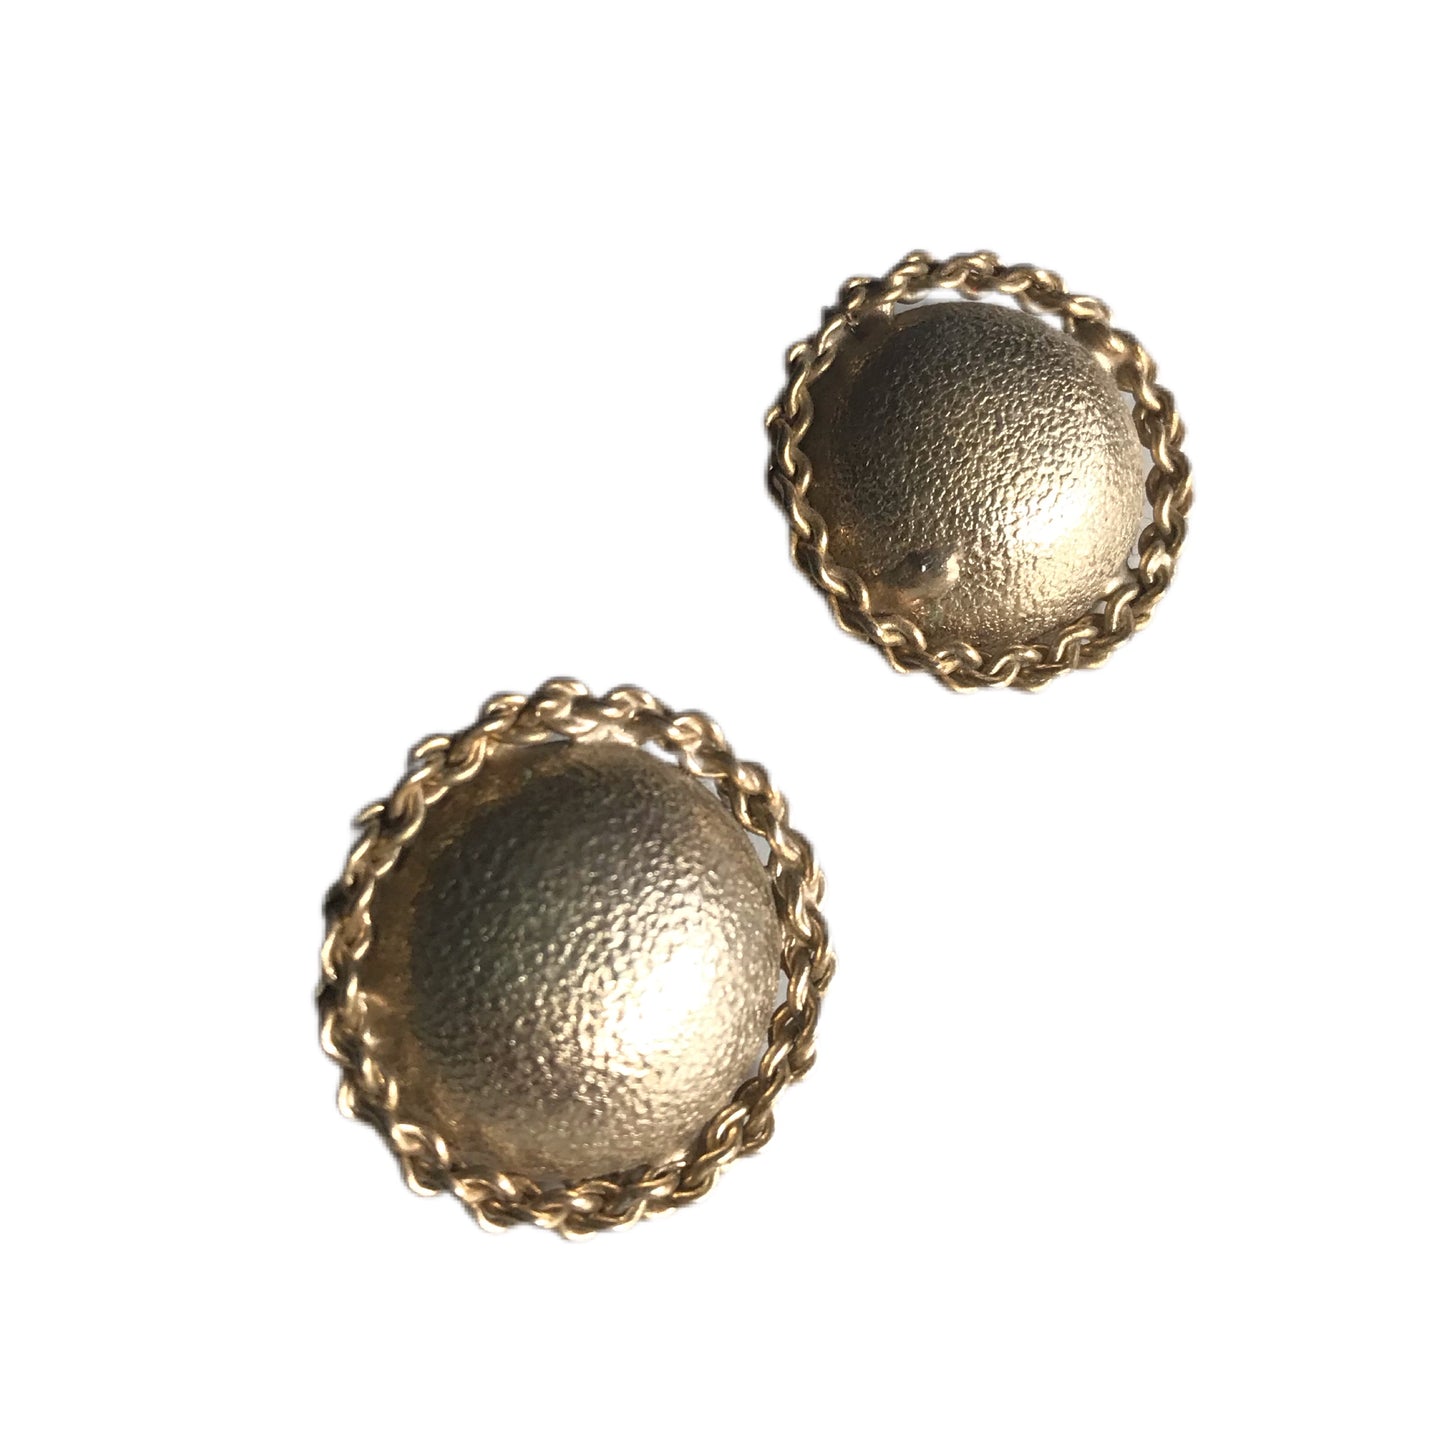 Hammered Gold Painted Dome Clip Earrings with Chain Edge circa 1960s